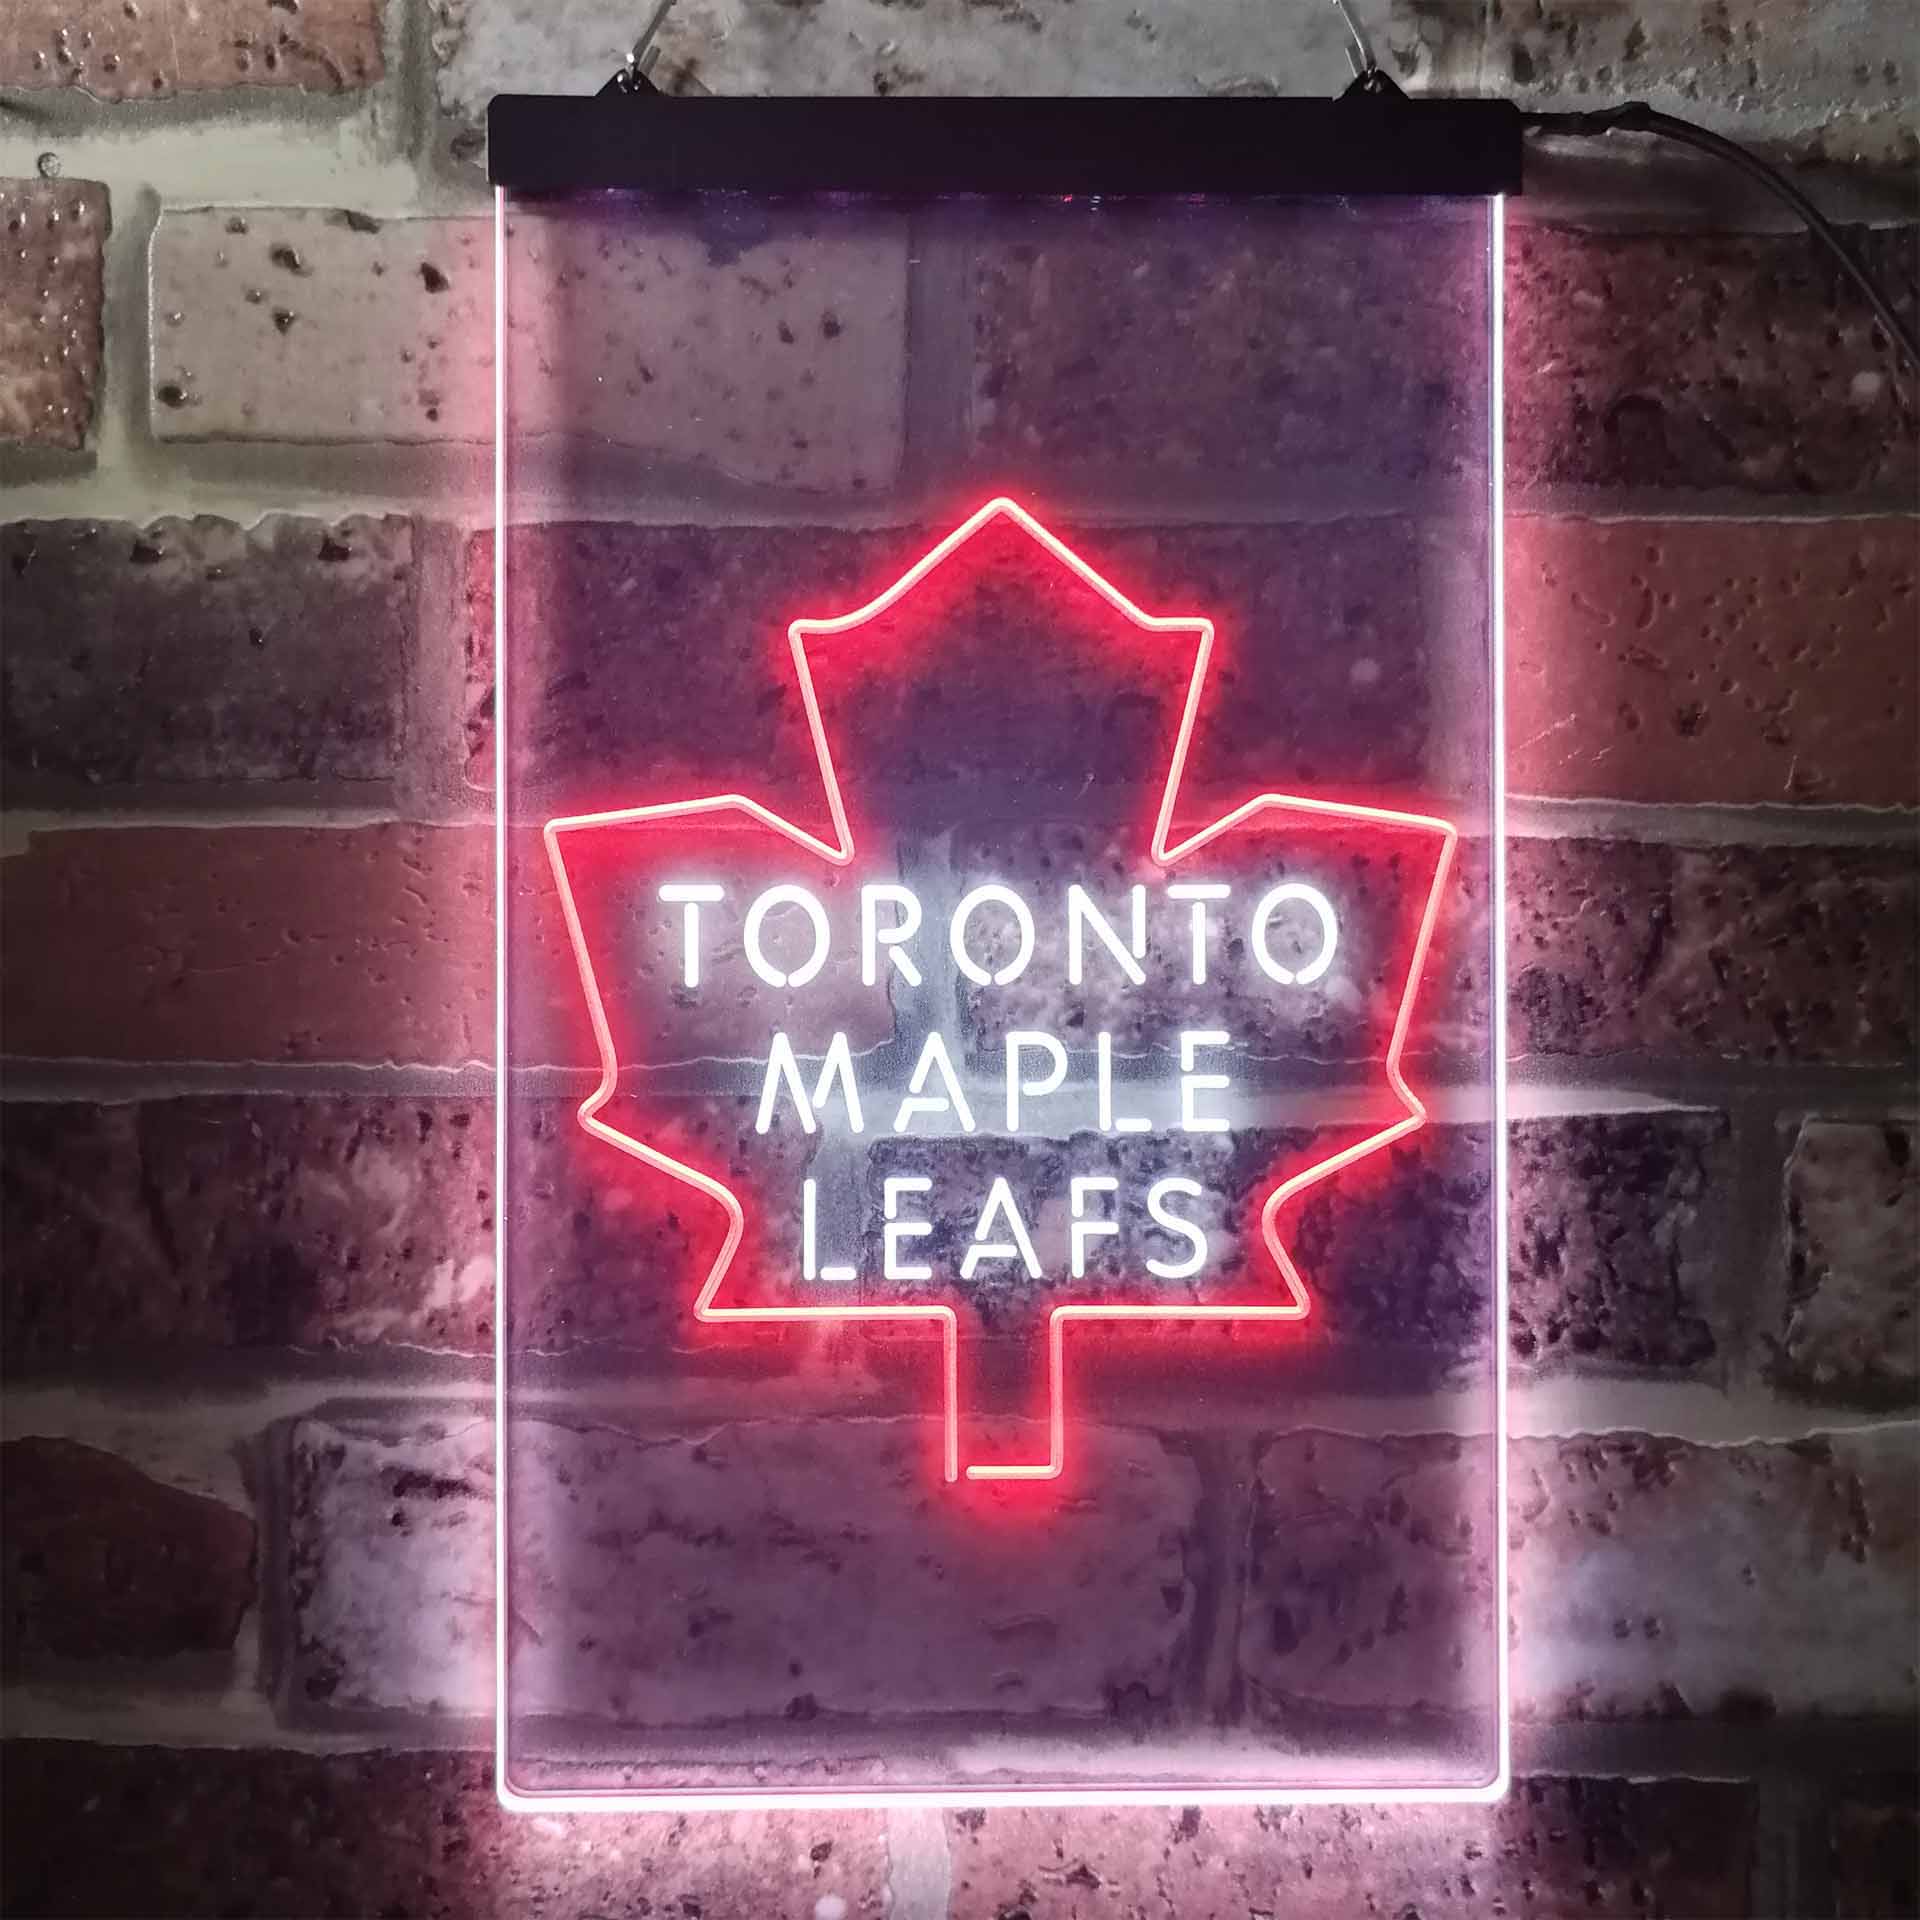 Toronto Maple Leafs LED Neon Sign